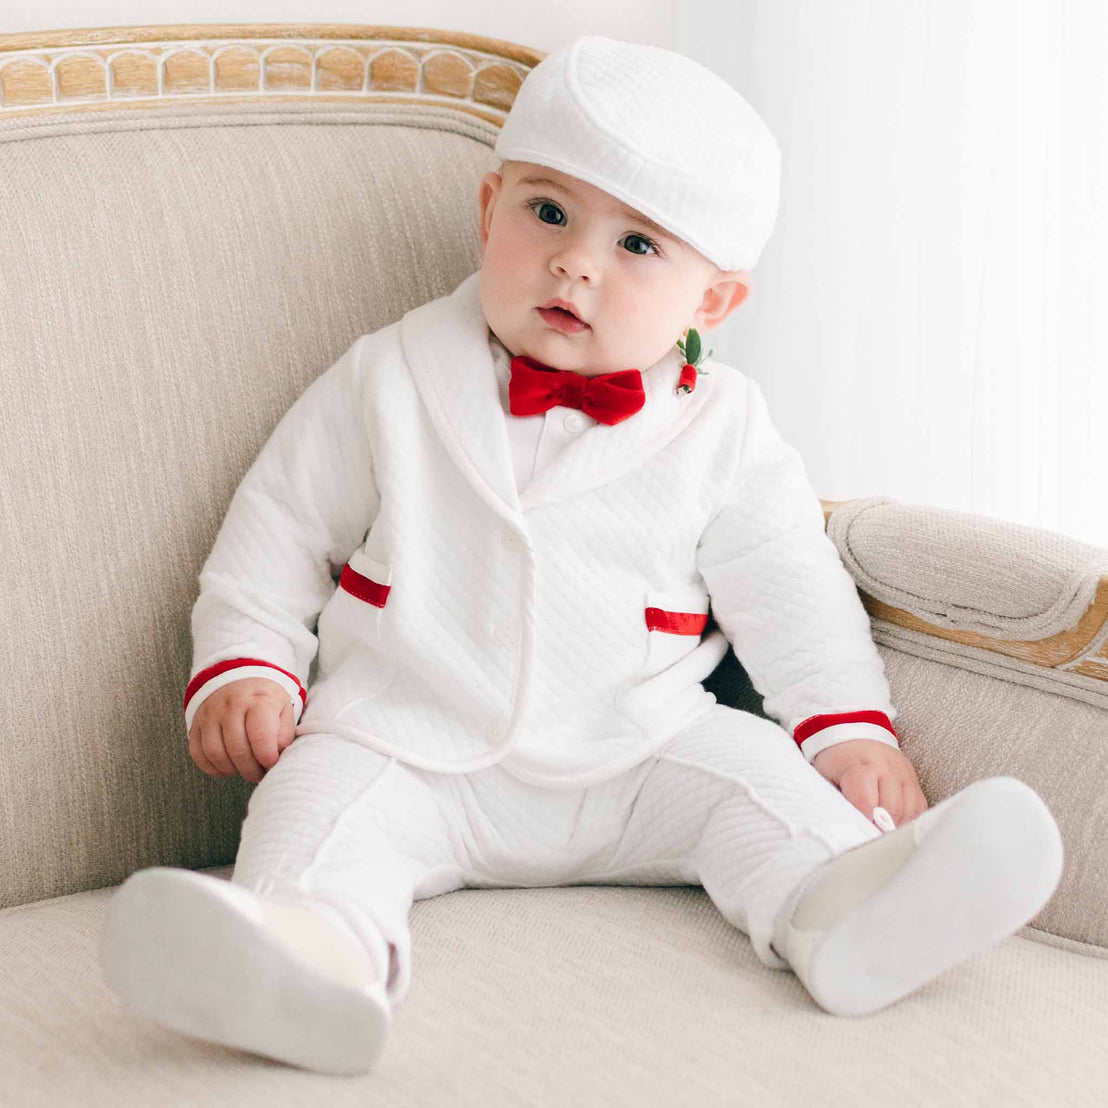 A baby dressed in a white christening outfit with red accents, including a Noah Red Bow Tie & Boutonniere, sitting on a beige sofa and looking to the side.